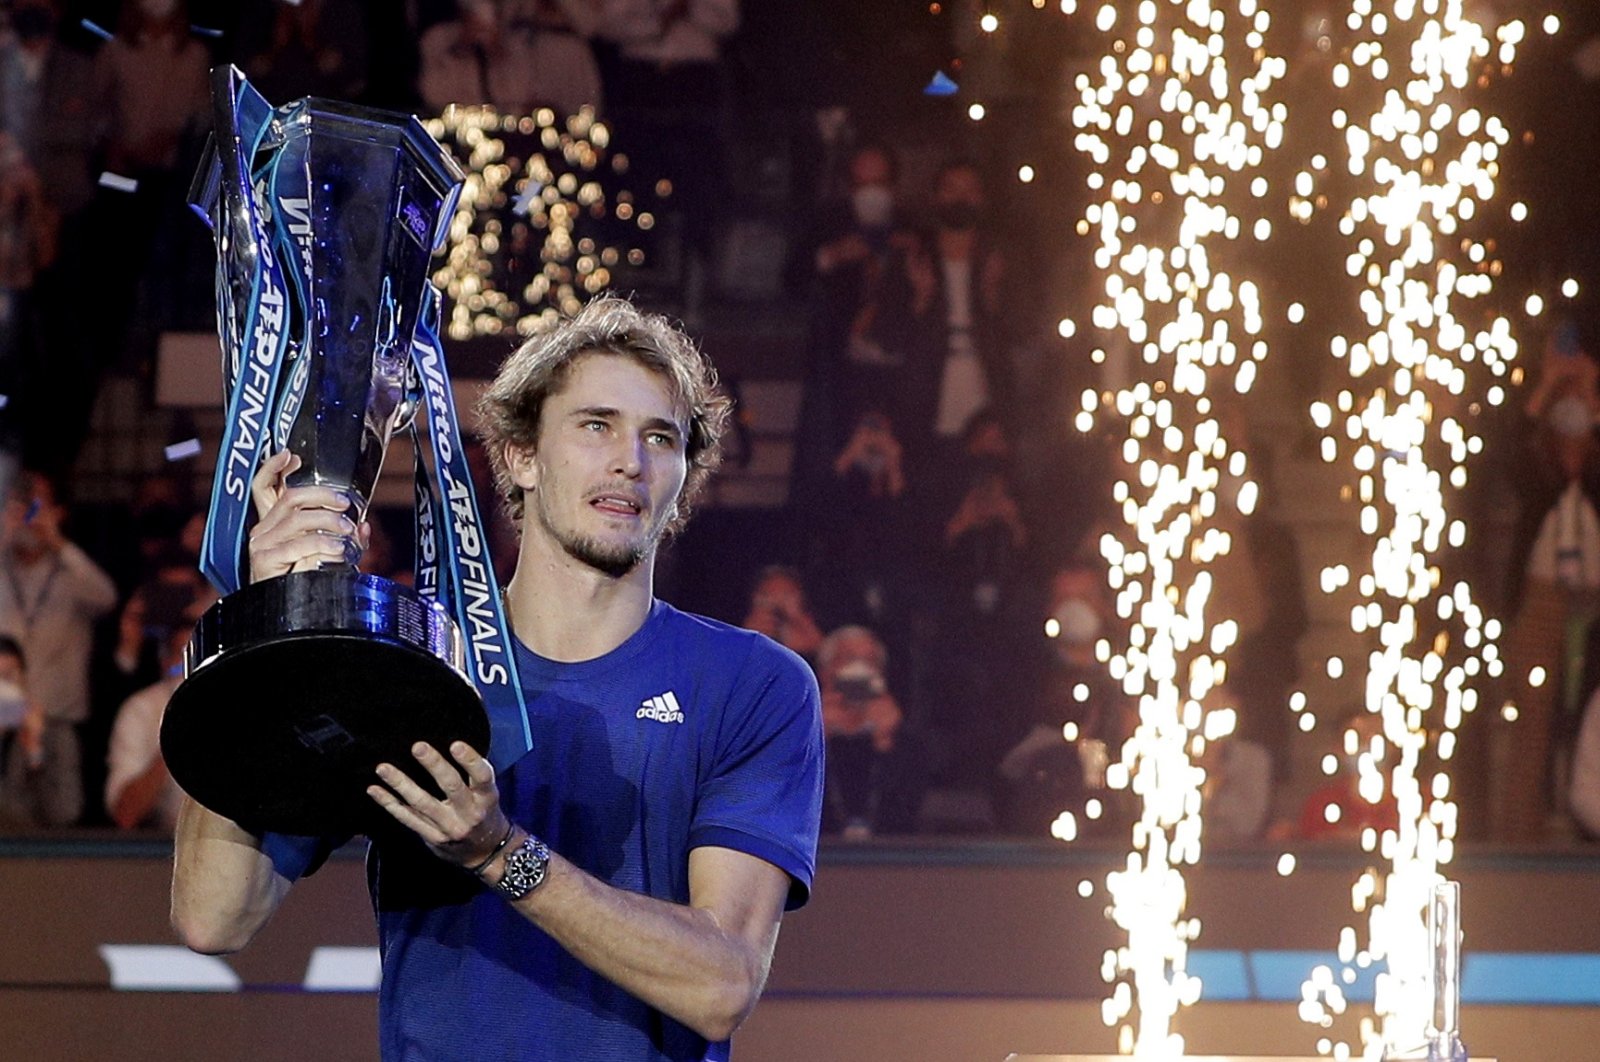 Germany&#039;s Alexander Zverev celebrates with the trophy after winning his final match against Russia&#039;s Daniil Medvedev, Turin, Italy, Nov. 21, 2021. (Reuters Photo)